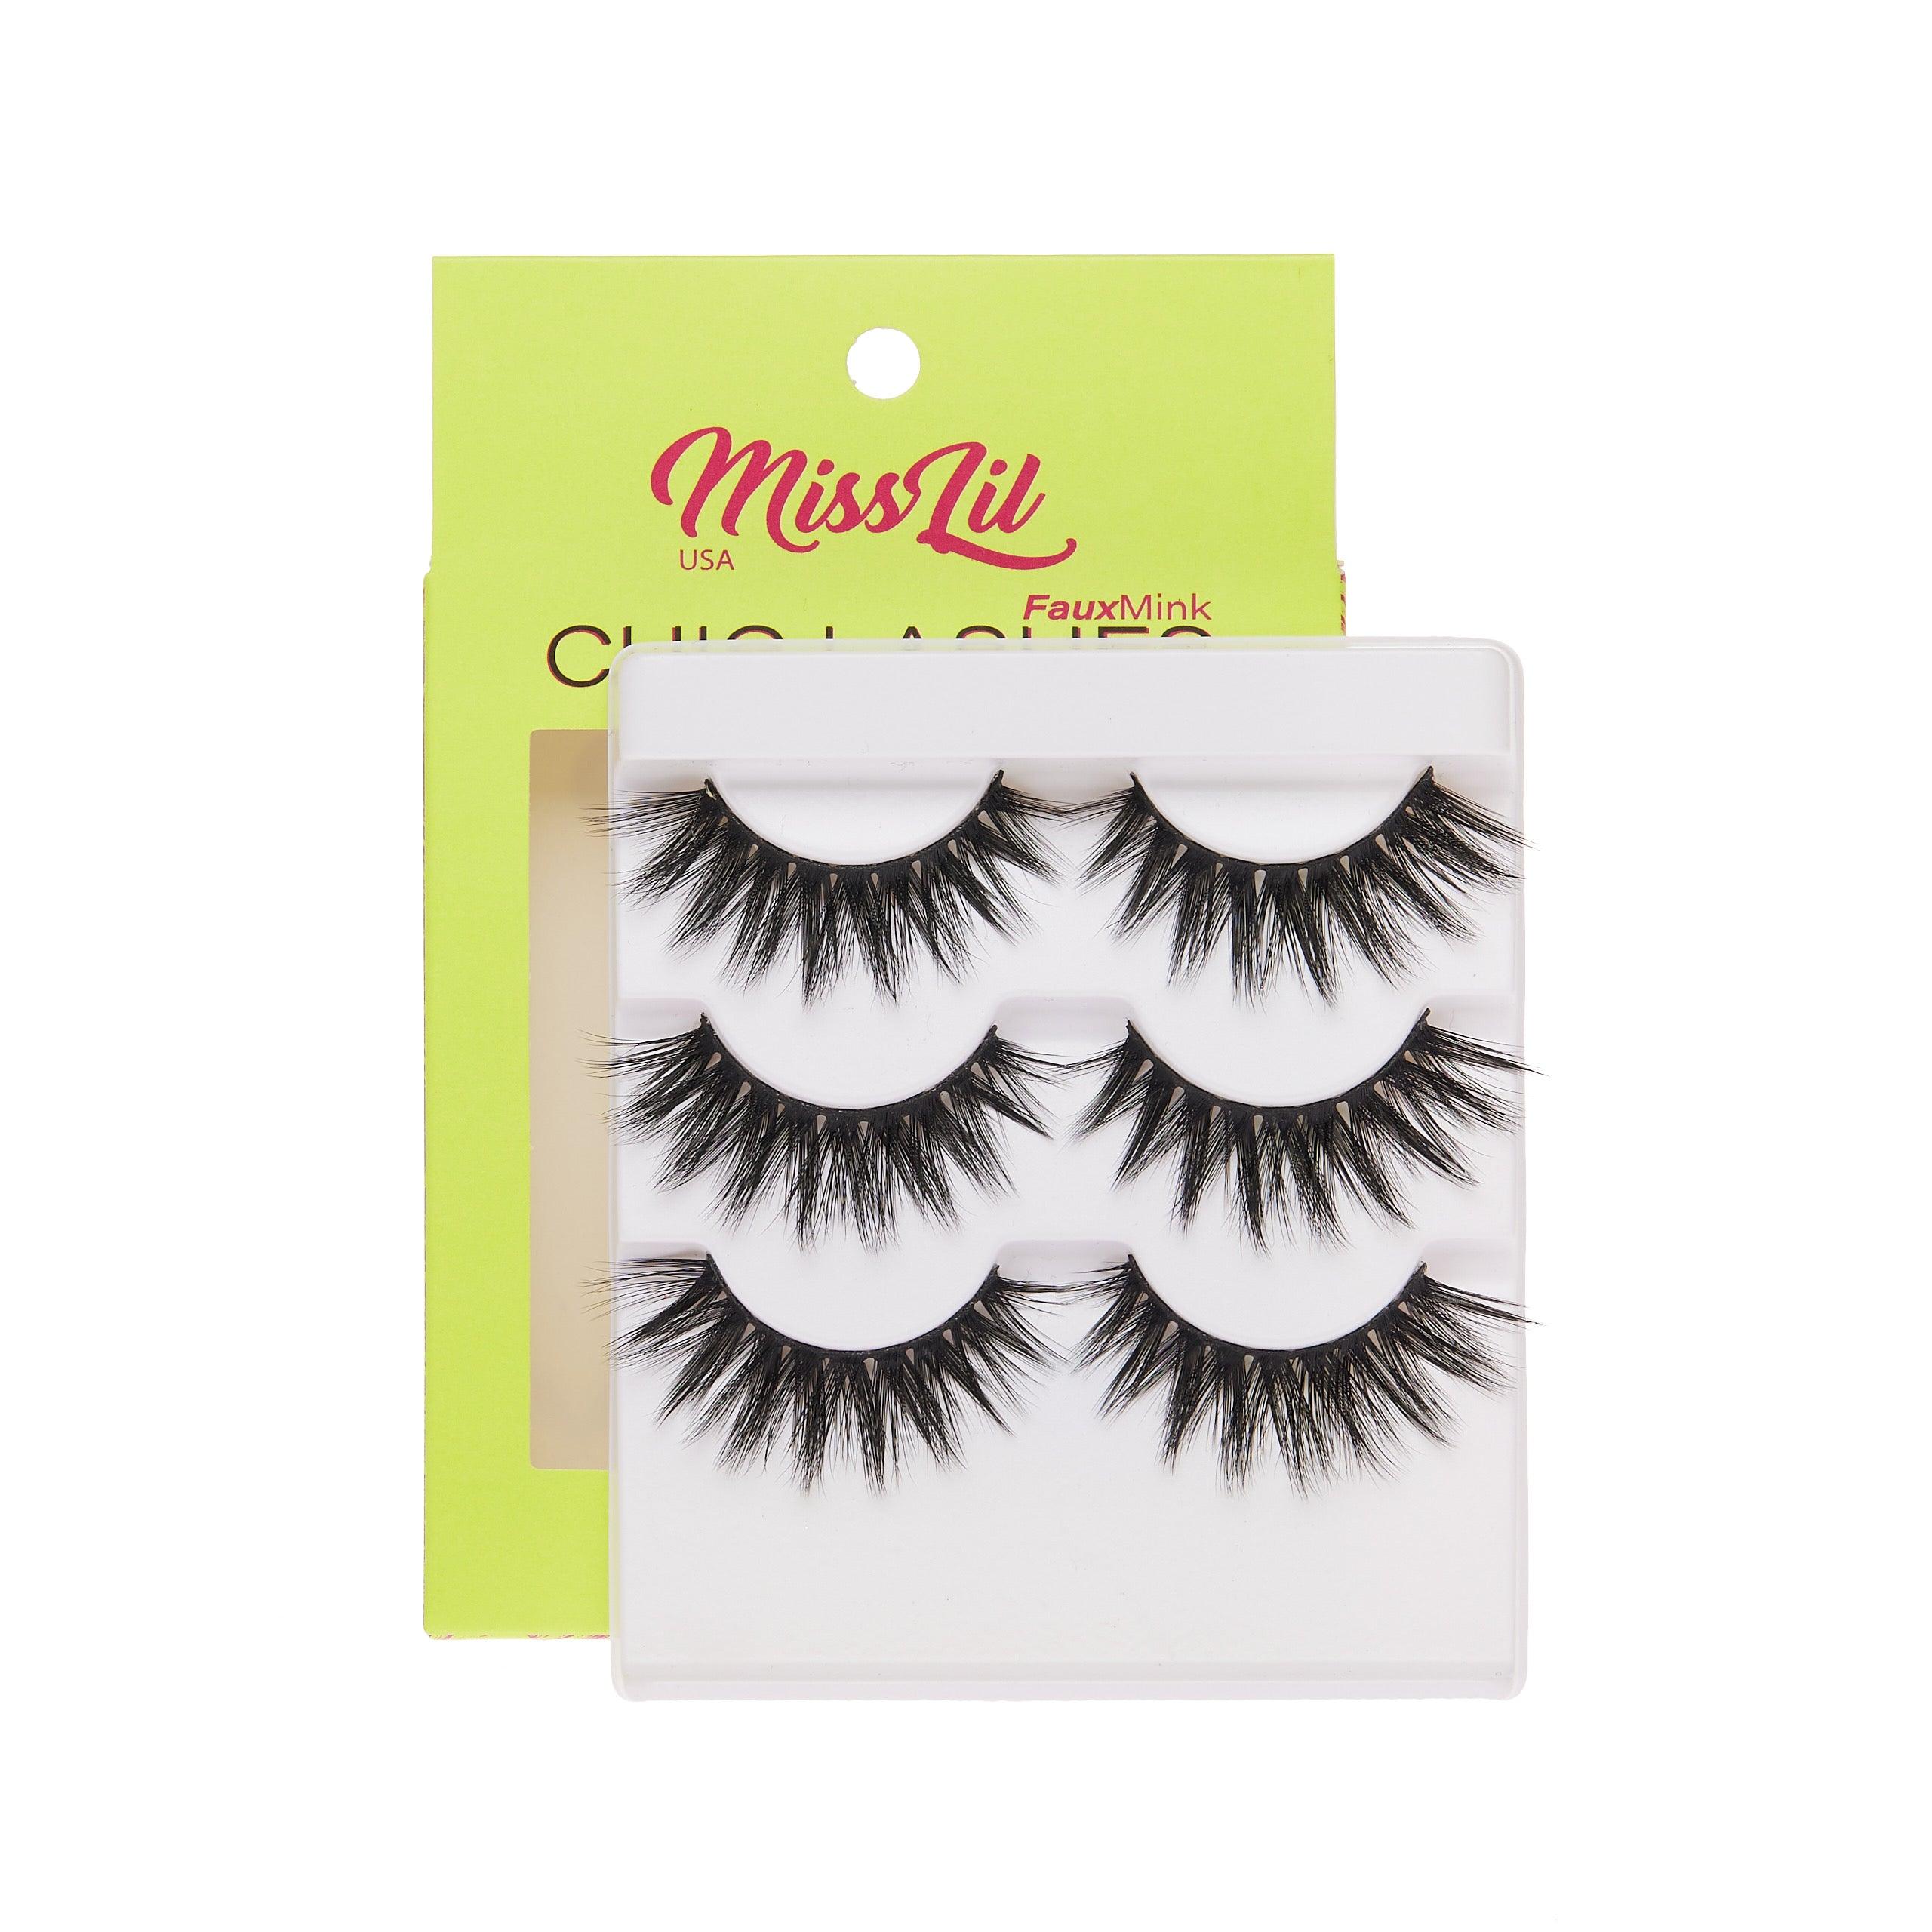 3-Pair Faux Mink Eyelashes - Chic Lashes Collection #5 - Pack of 3 - Miss Lil USA